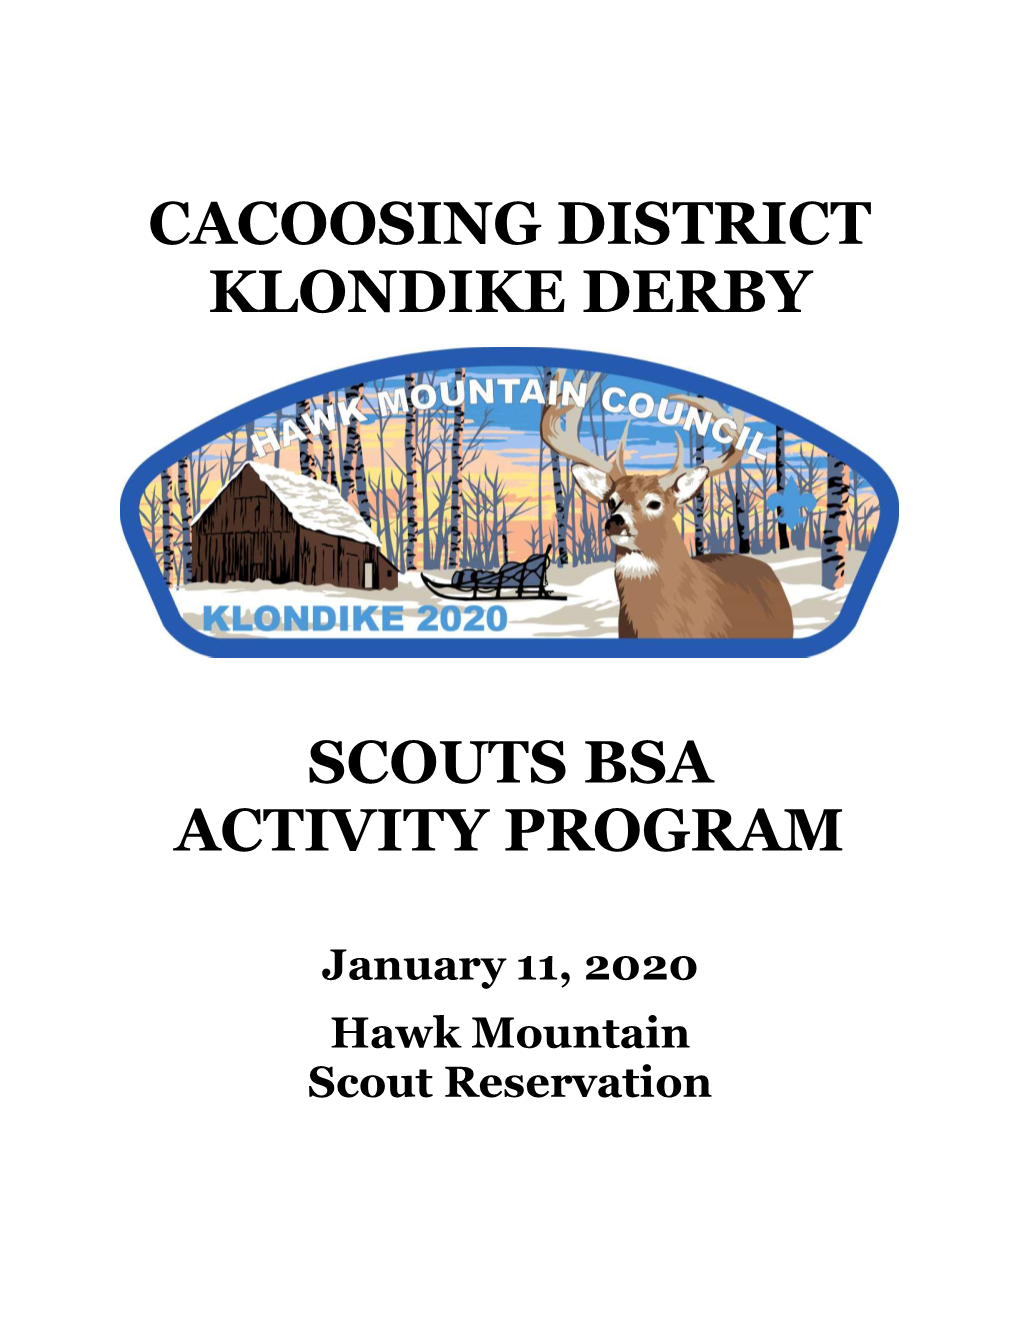 Cacoosing District Klondike Derby Scouts Bsa Activity